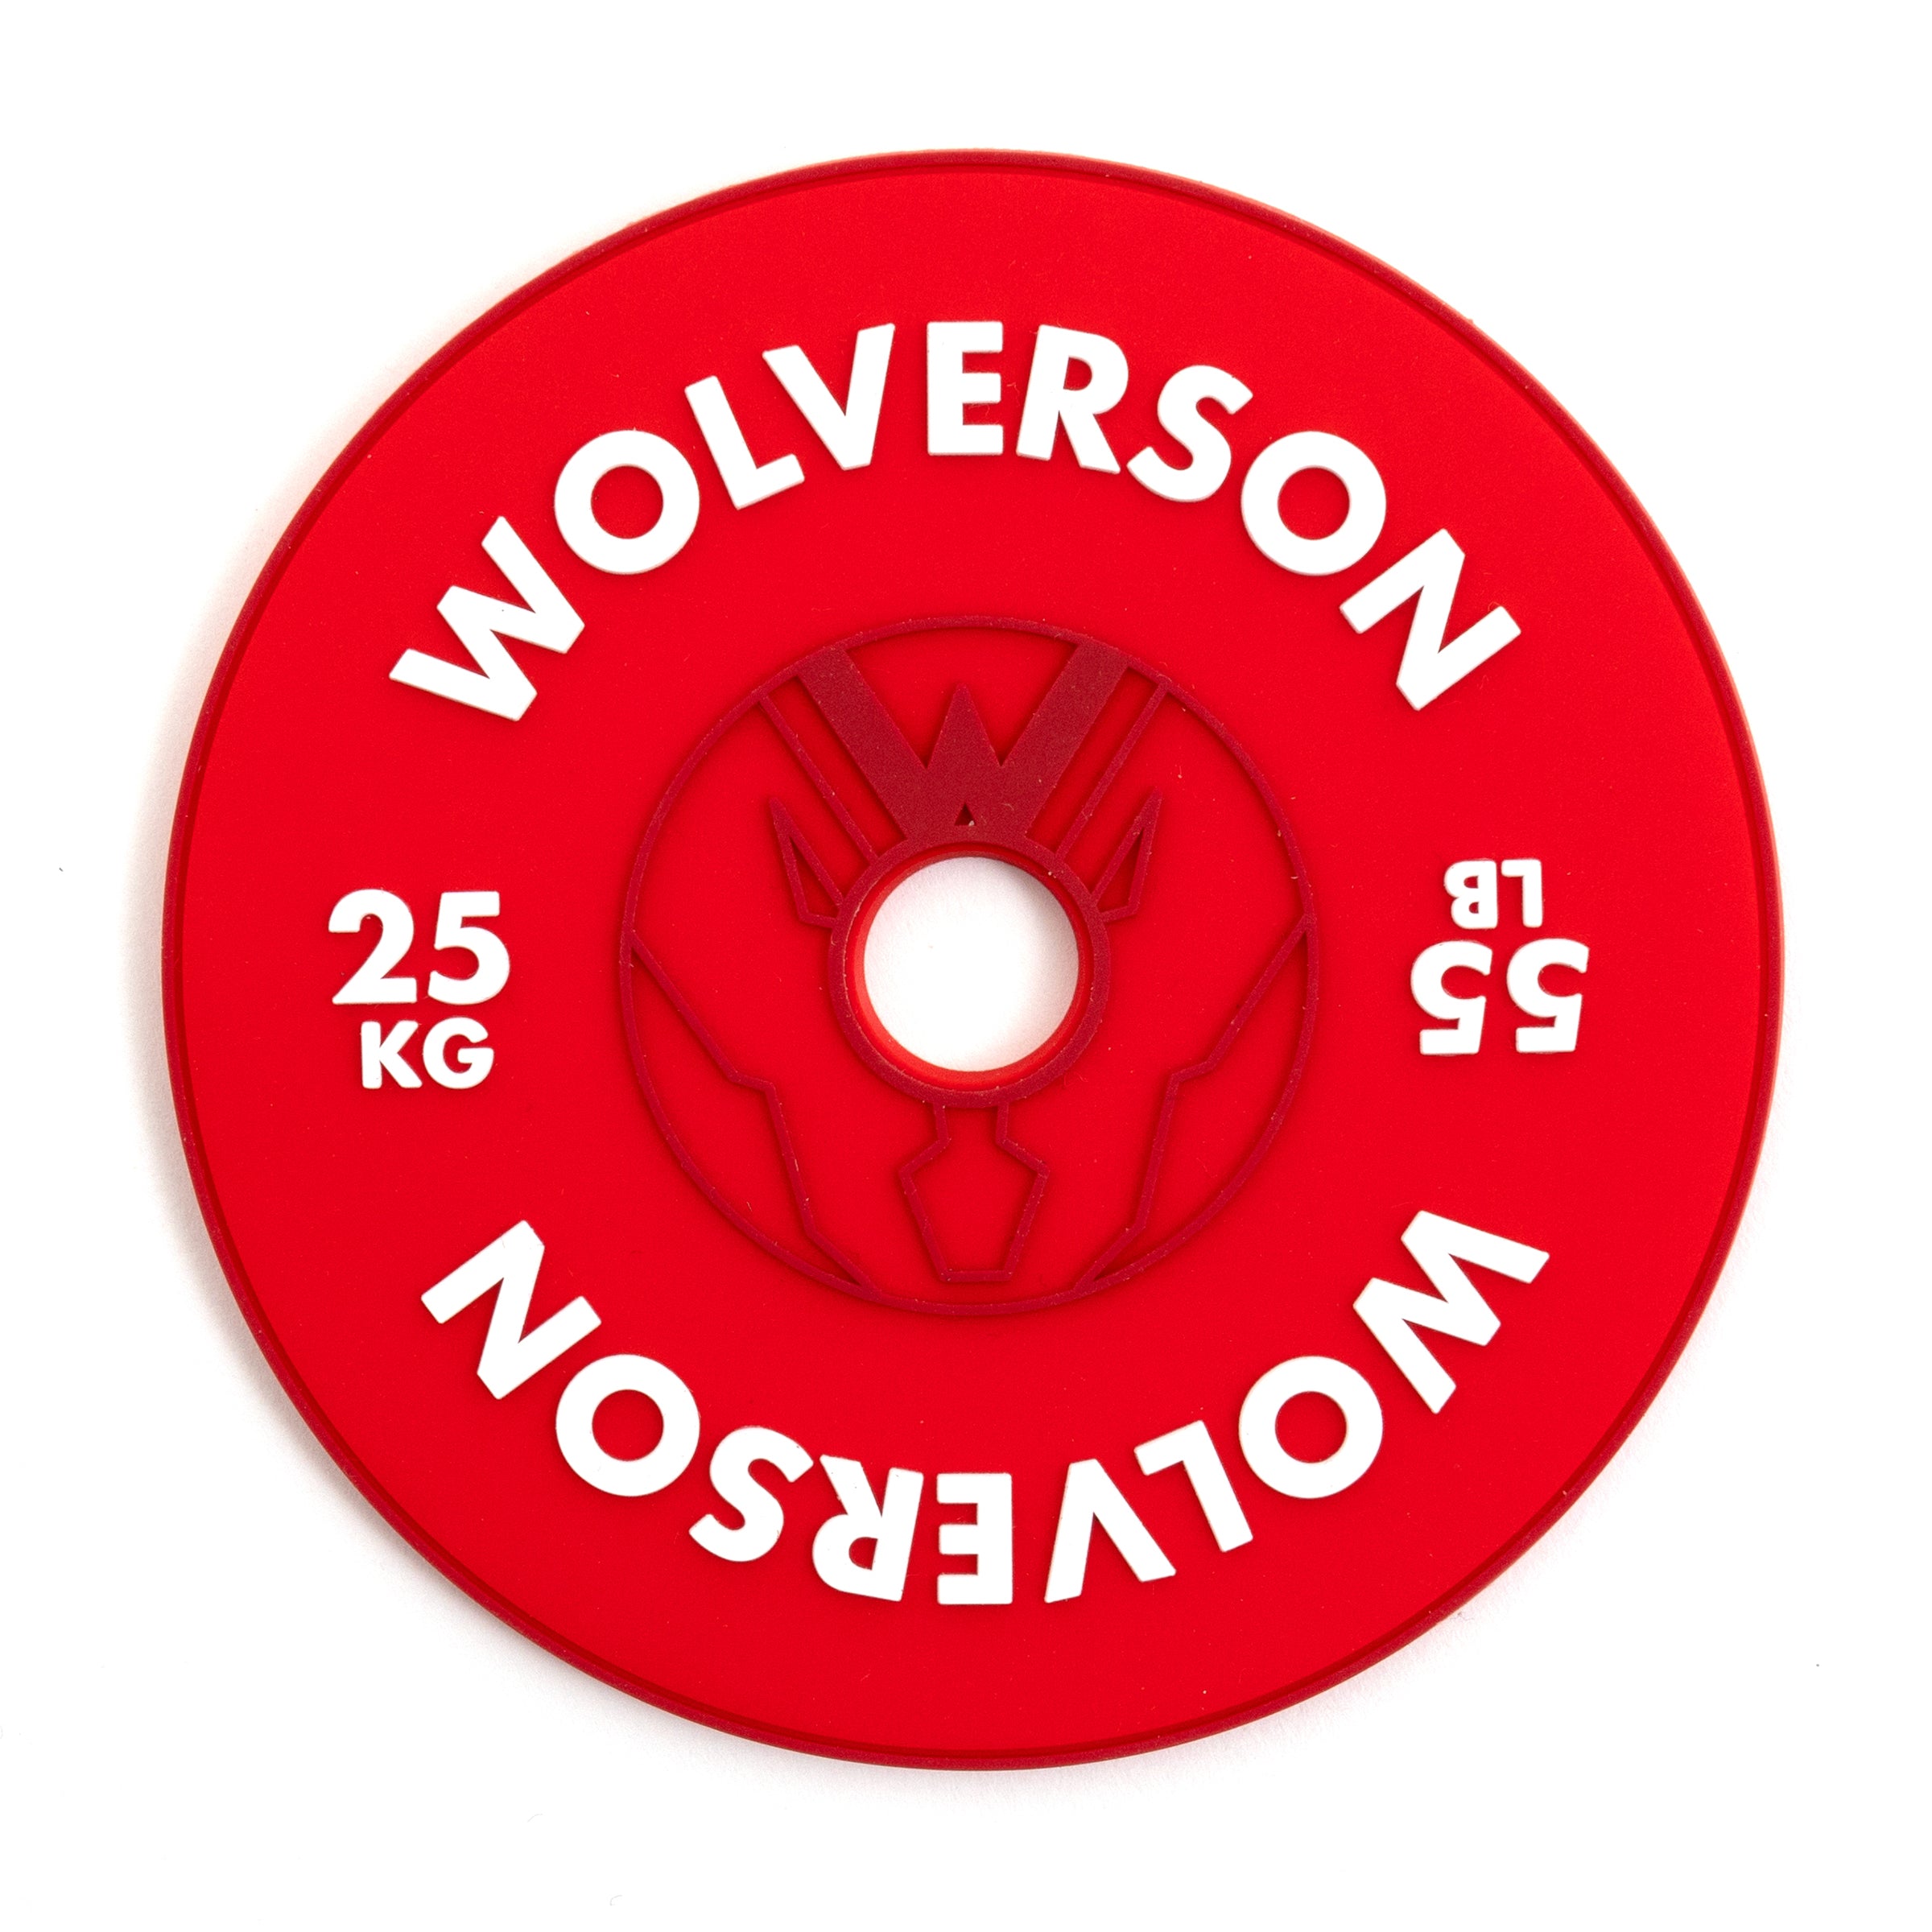 Wolverson Bumper Plate Coasters (4 Pack)